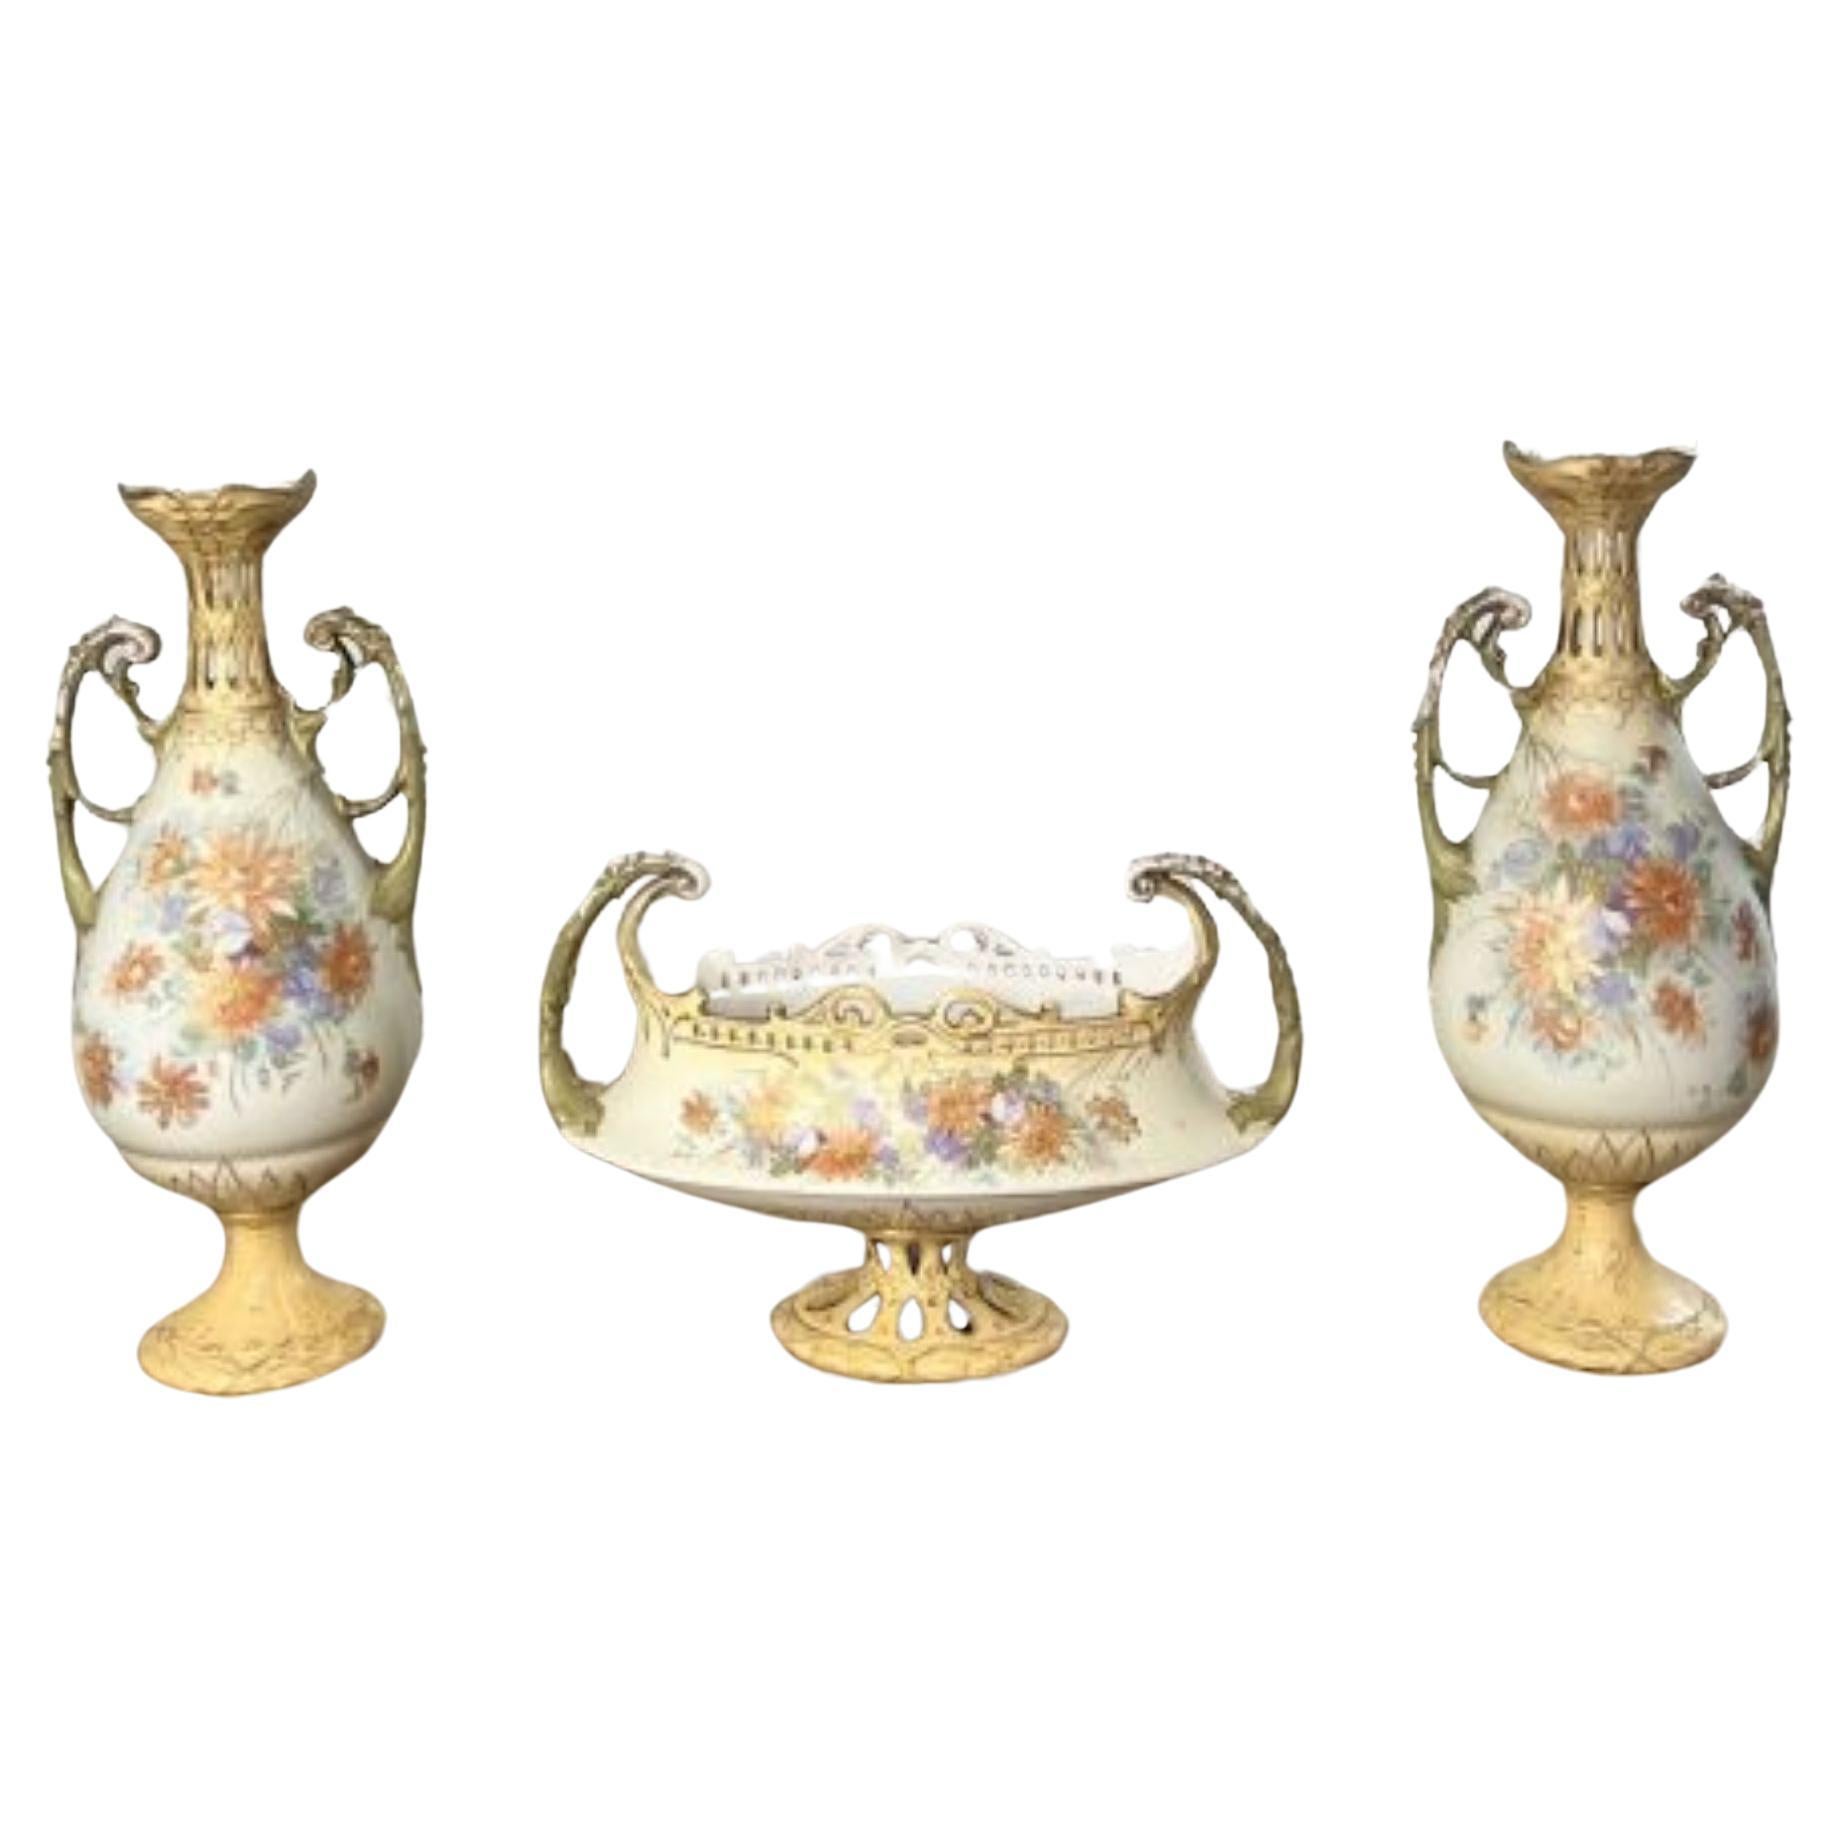 Outstanding quality antique Royal Vienna centrepiece and side vases  For Sale